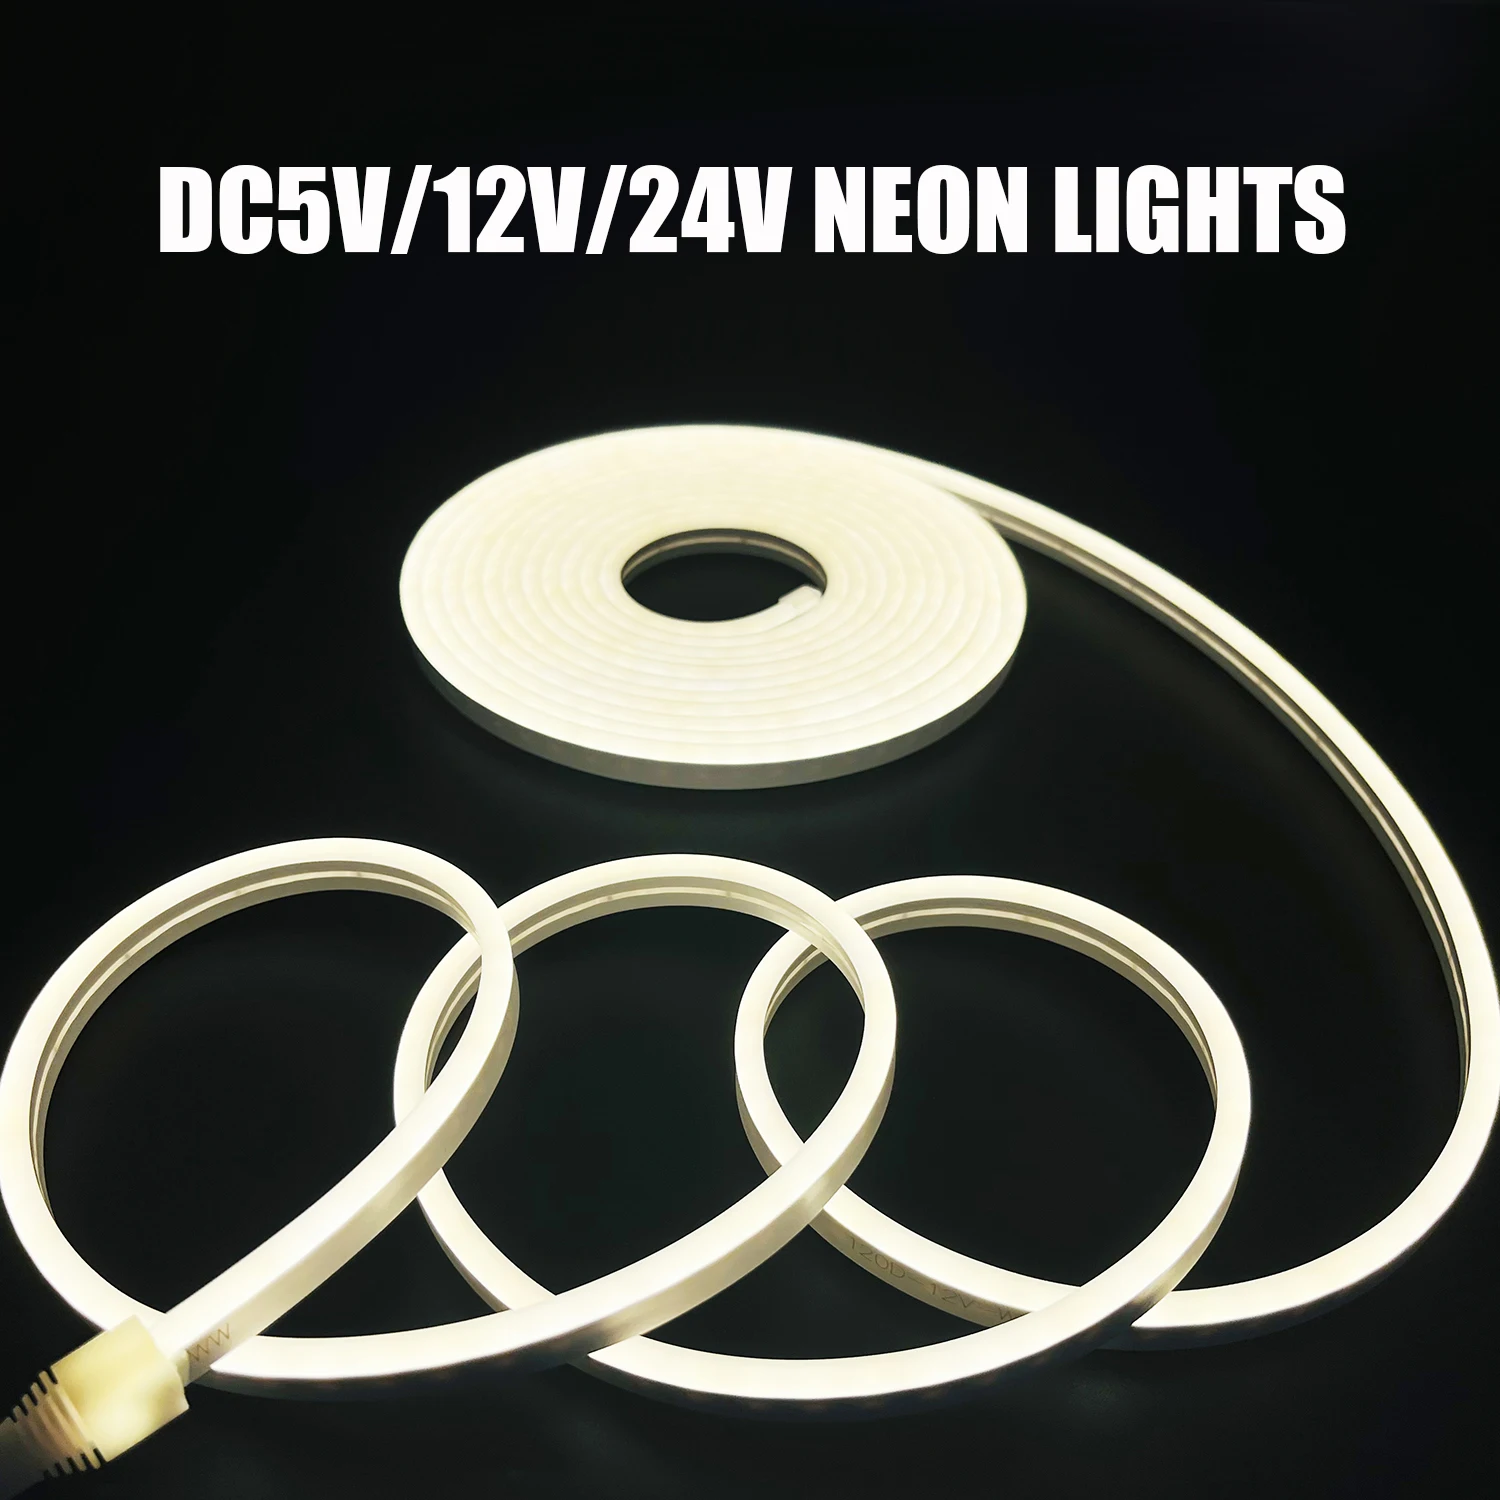 

DC5V 12V 24V Color Neon Lights Flex Tape 6mm Narrow Waterproof Rope Silicon Tube Bar Red Green Blue Yellow Pink White DIY Decor